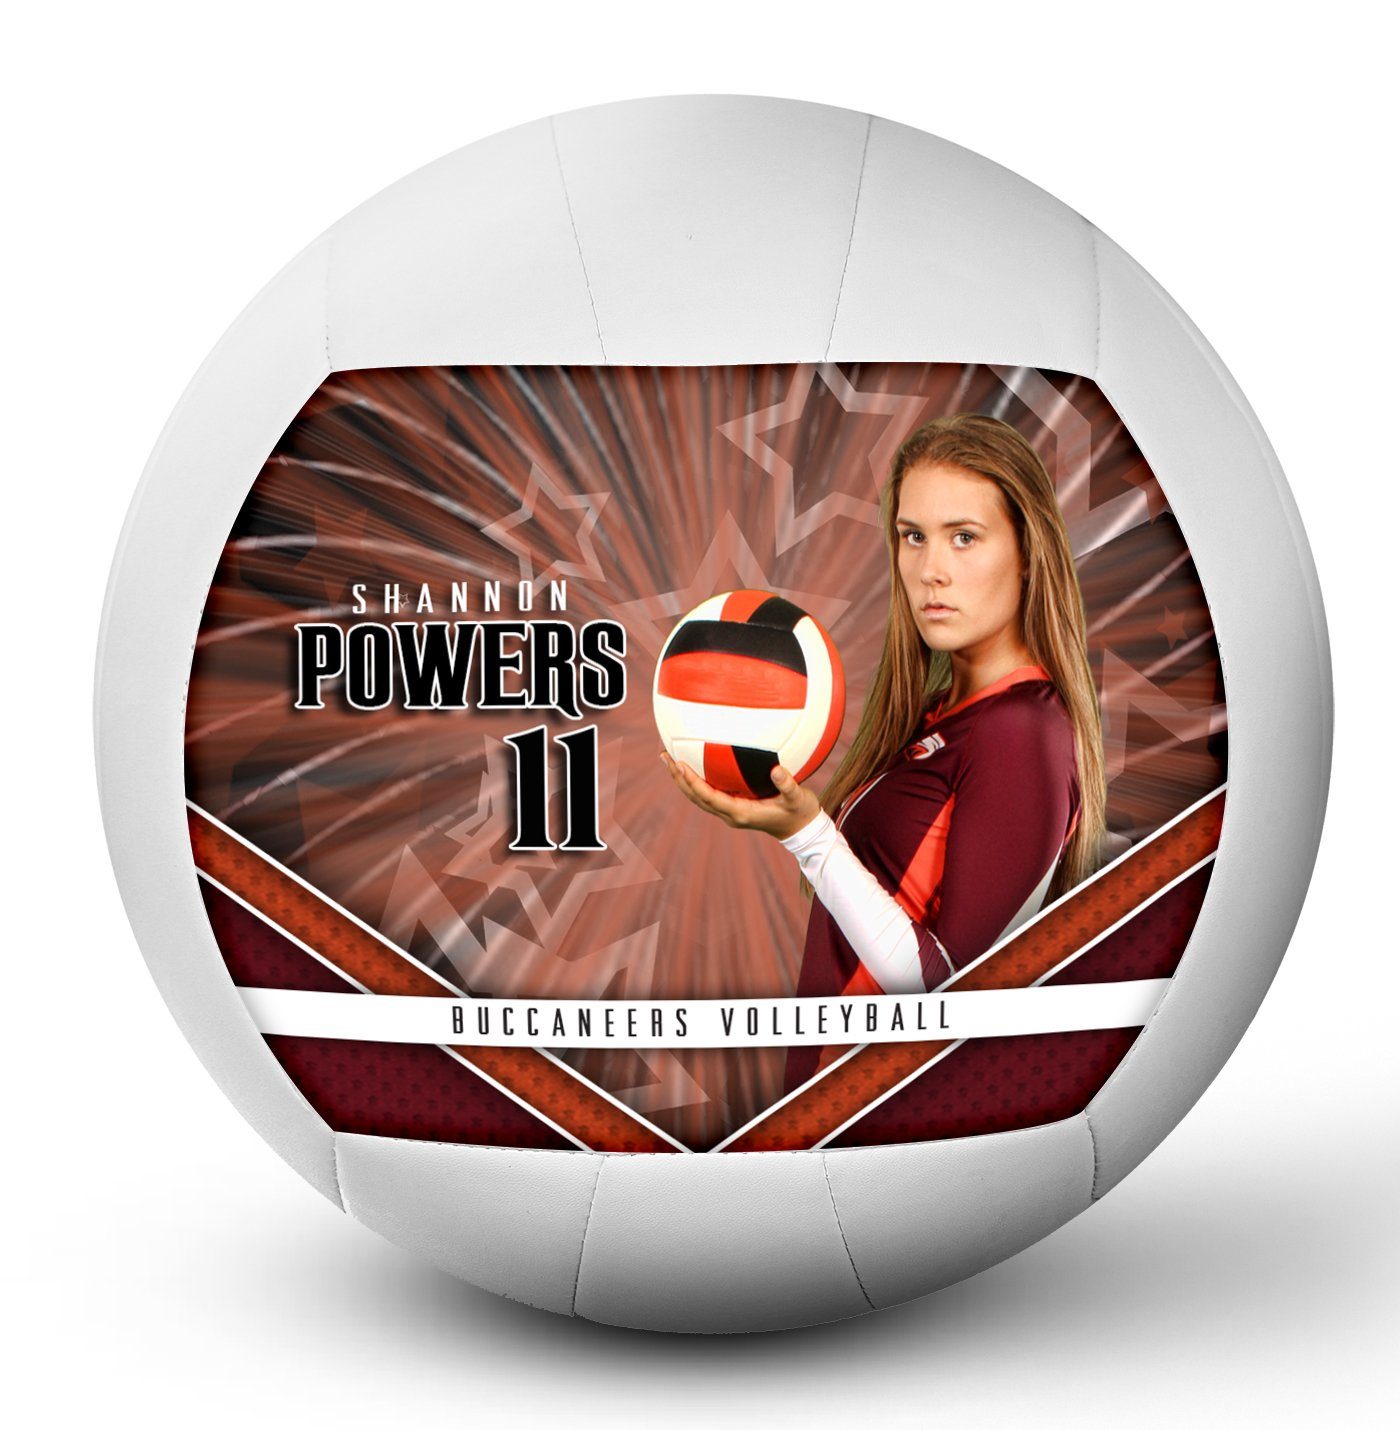 Spirit - V.1 - Make-A-Ball Full Template Collection-Photoshop Template - PSMGraphix